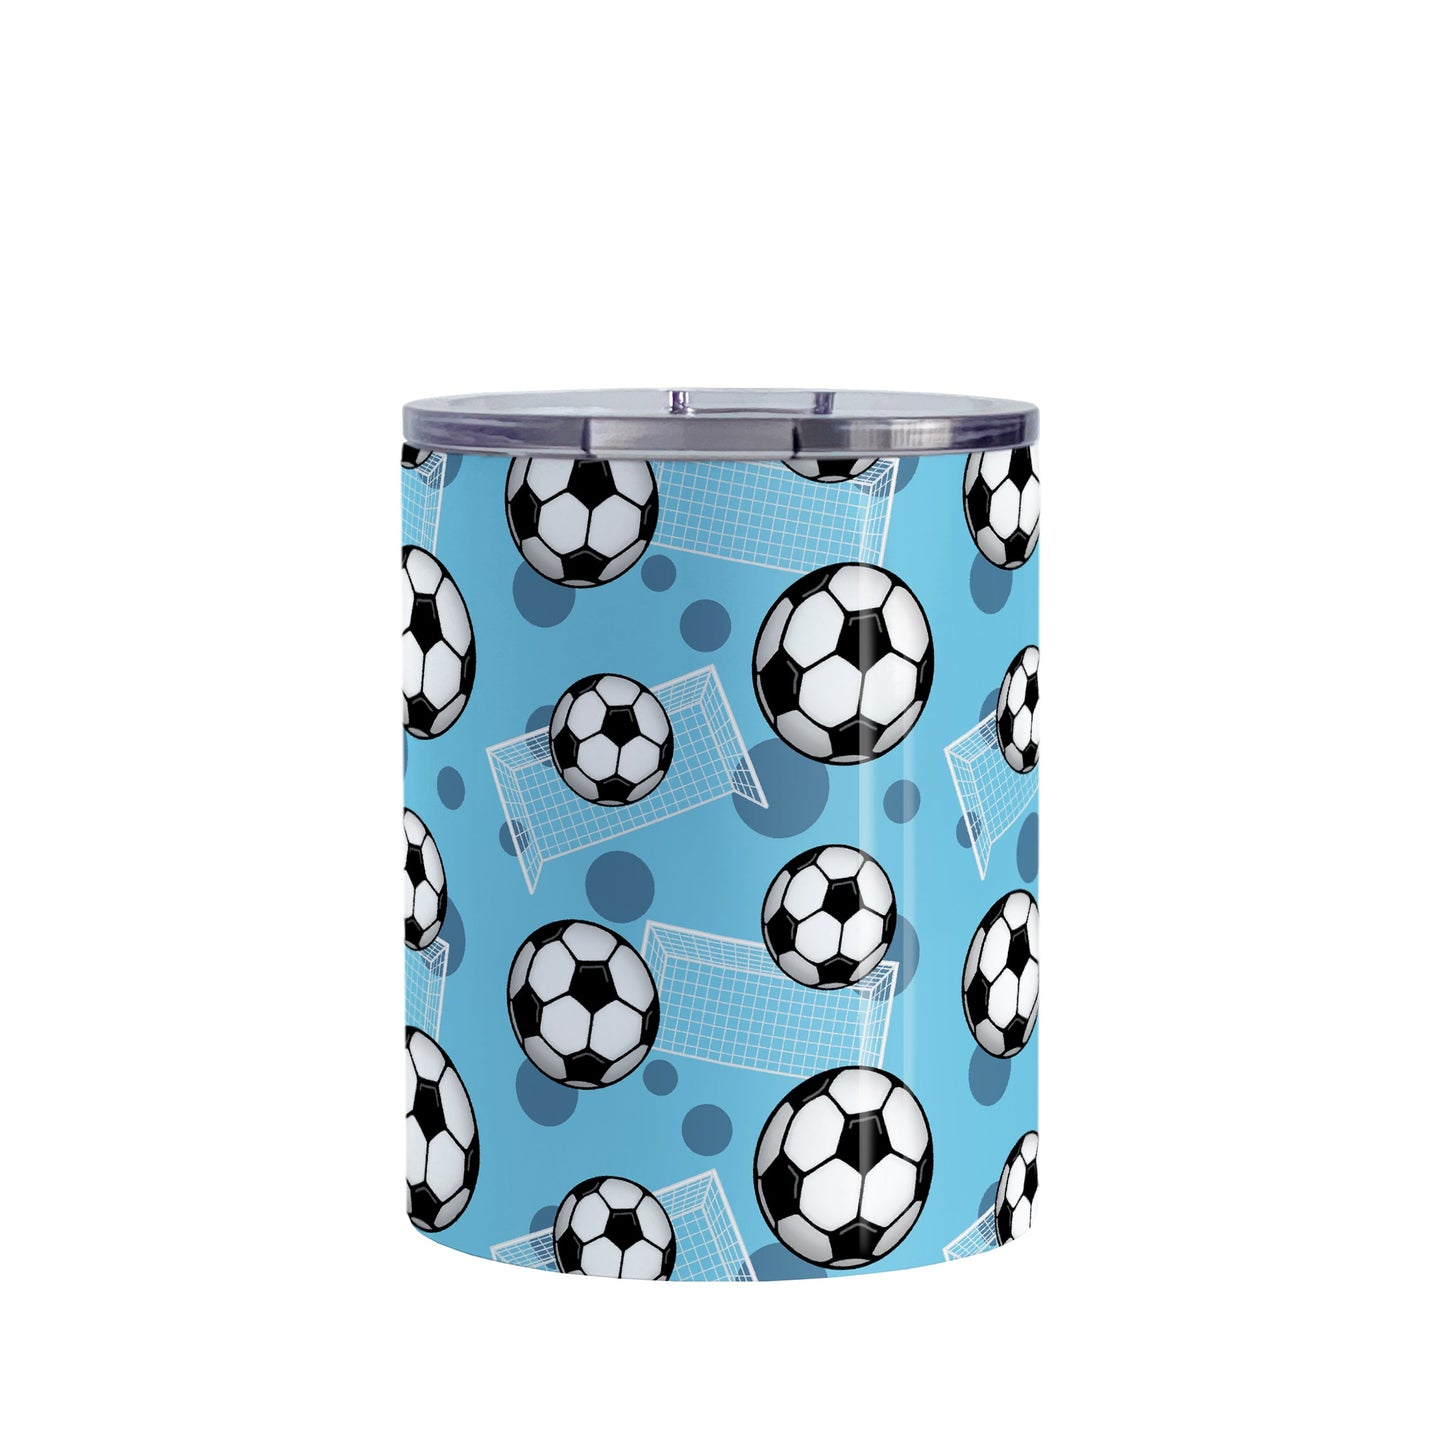 Soccer Ball and Goal Pattern Blue Tumbler Cup (10oz) at Amy's Coffee Mugs. A stainless steel insulated tumbler cup designed with a pattern of soccer balls and goals over a blue background that wraps around the cup. This blue soccer tumbler cup is perfect for people who love or play soccer.